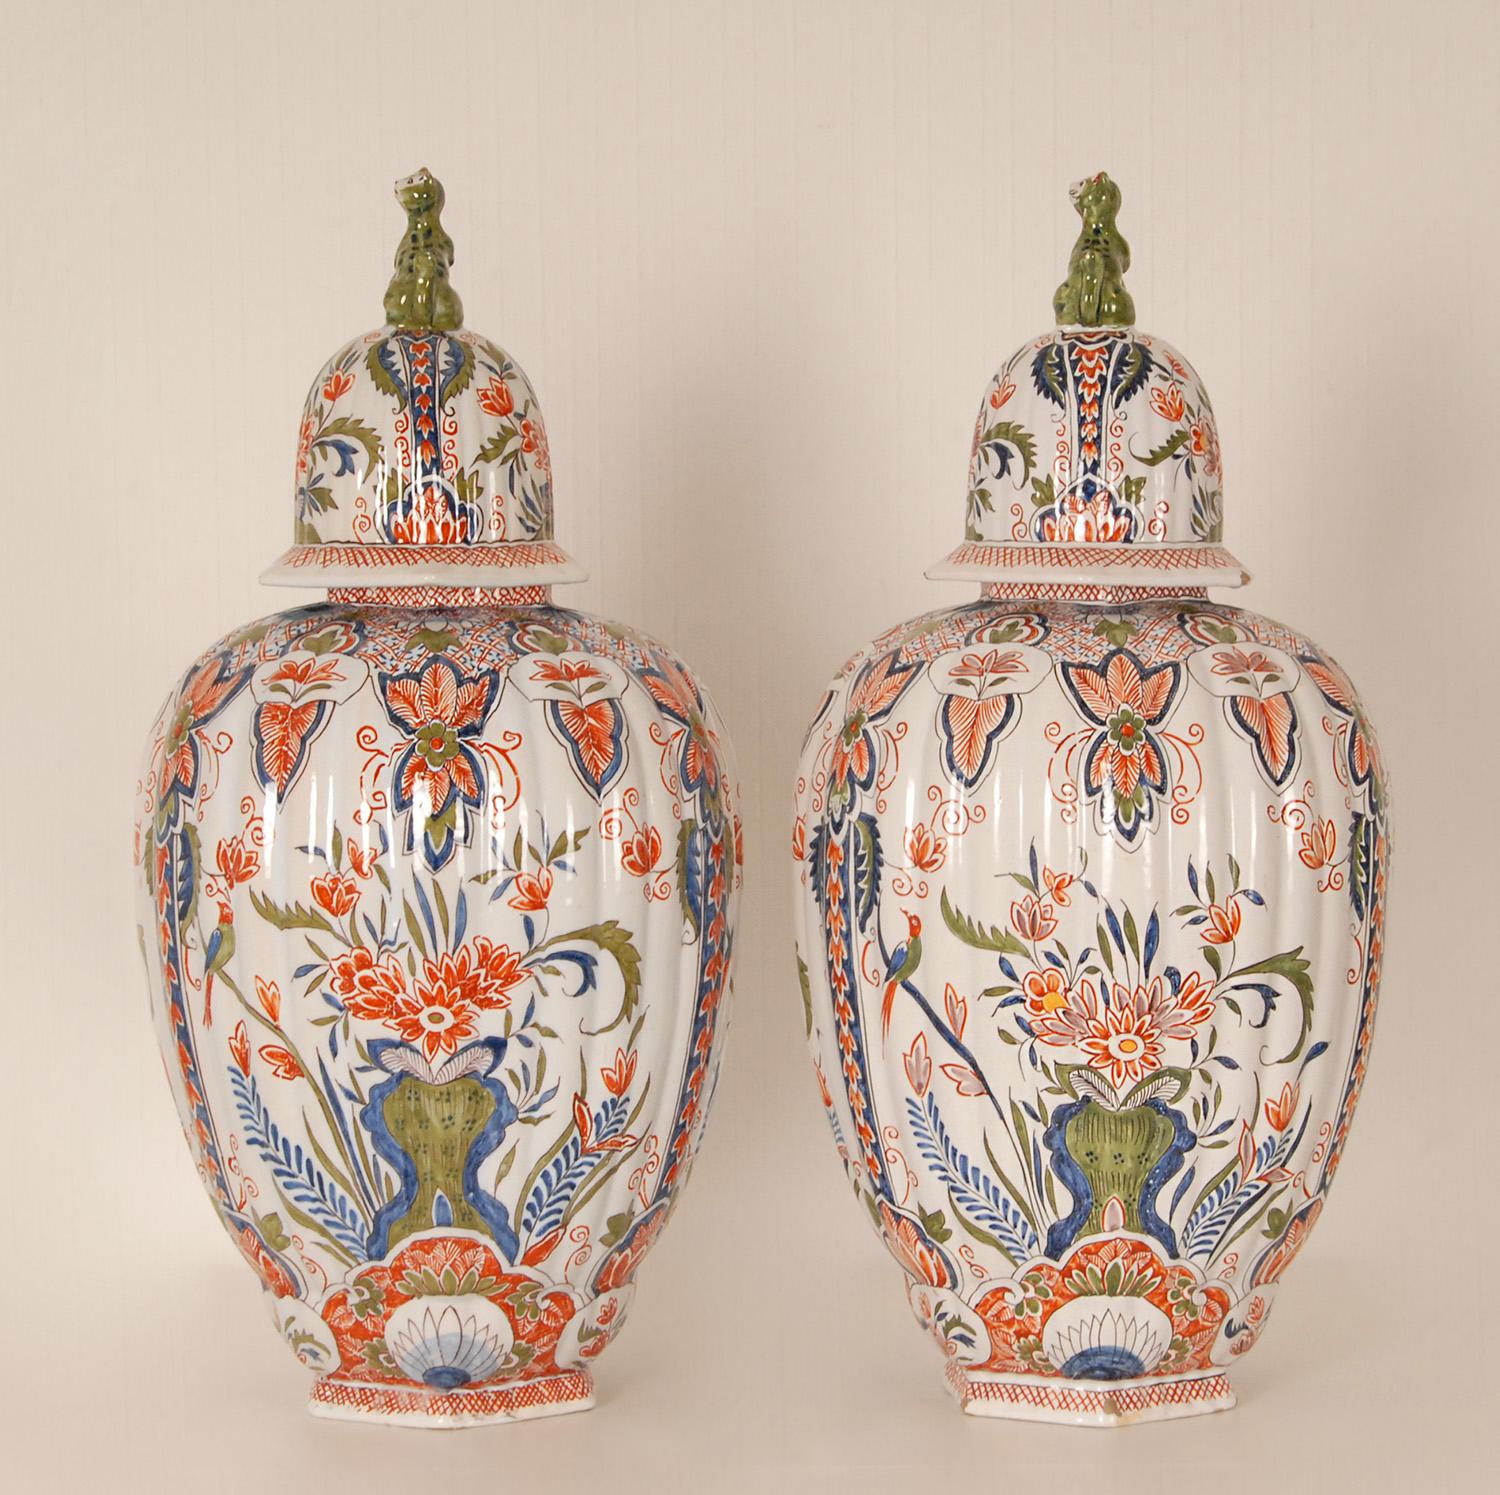 Antique Delft Vases Polychrome Covered Baluster Vases With Foo Cats - a pair For Sale 1